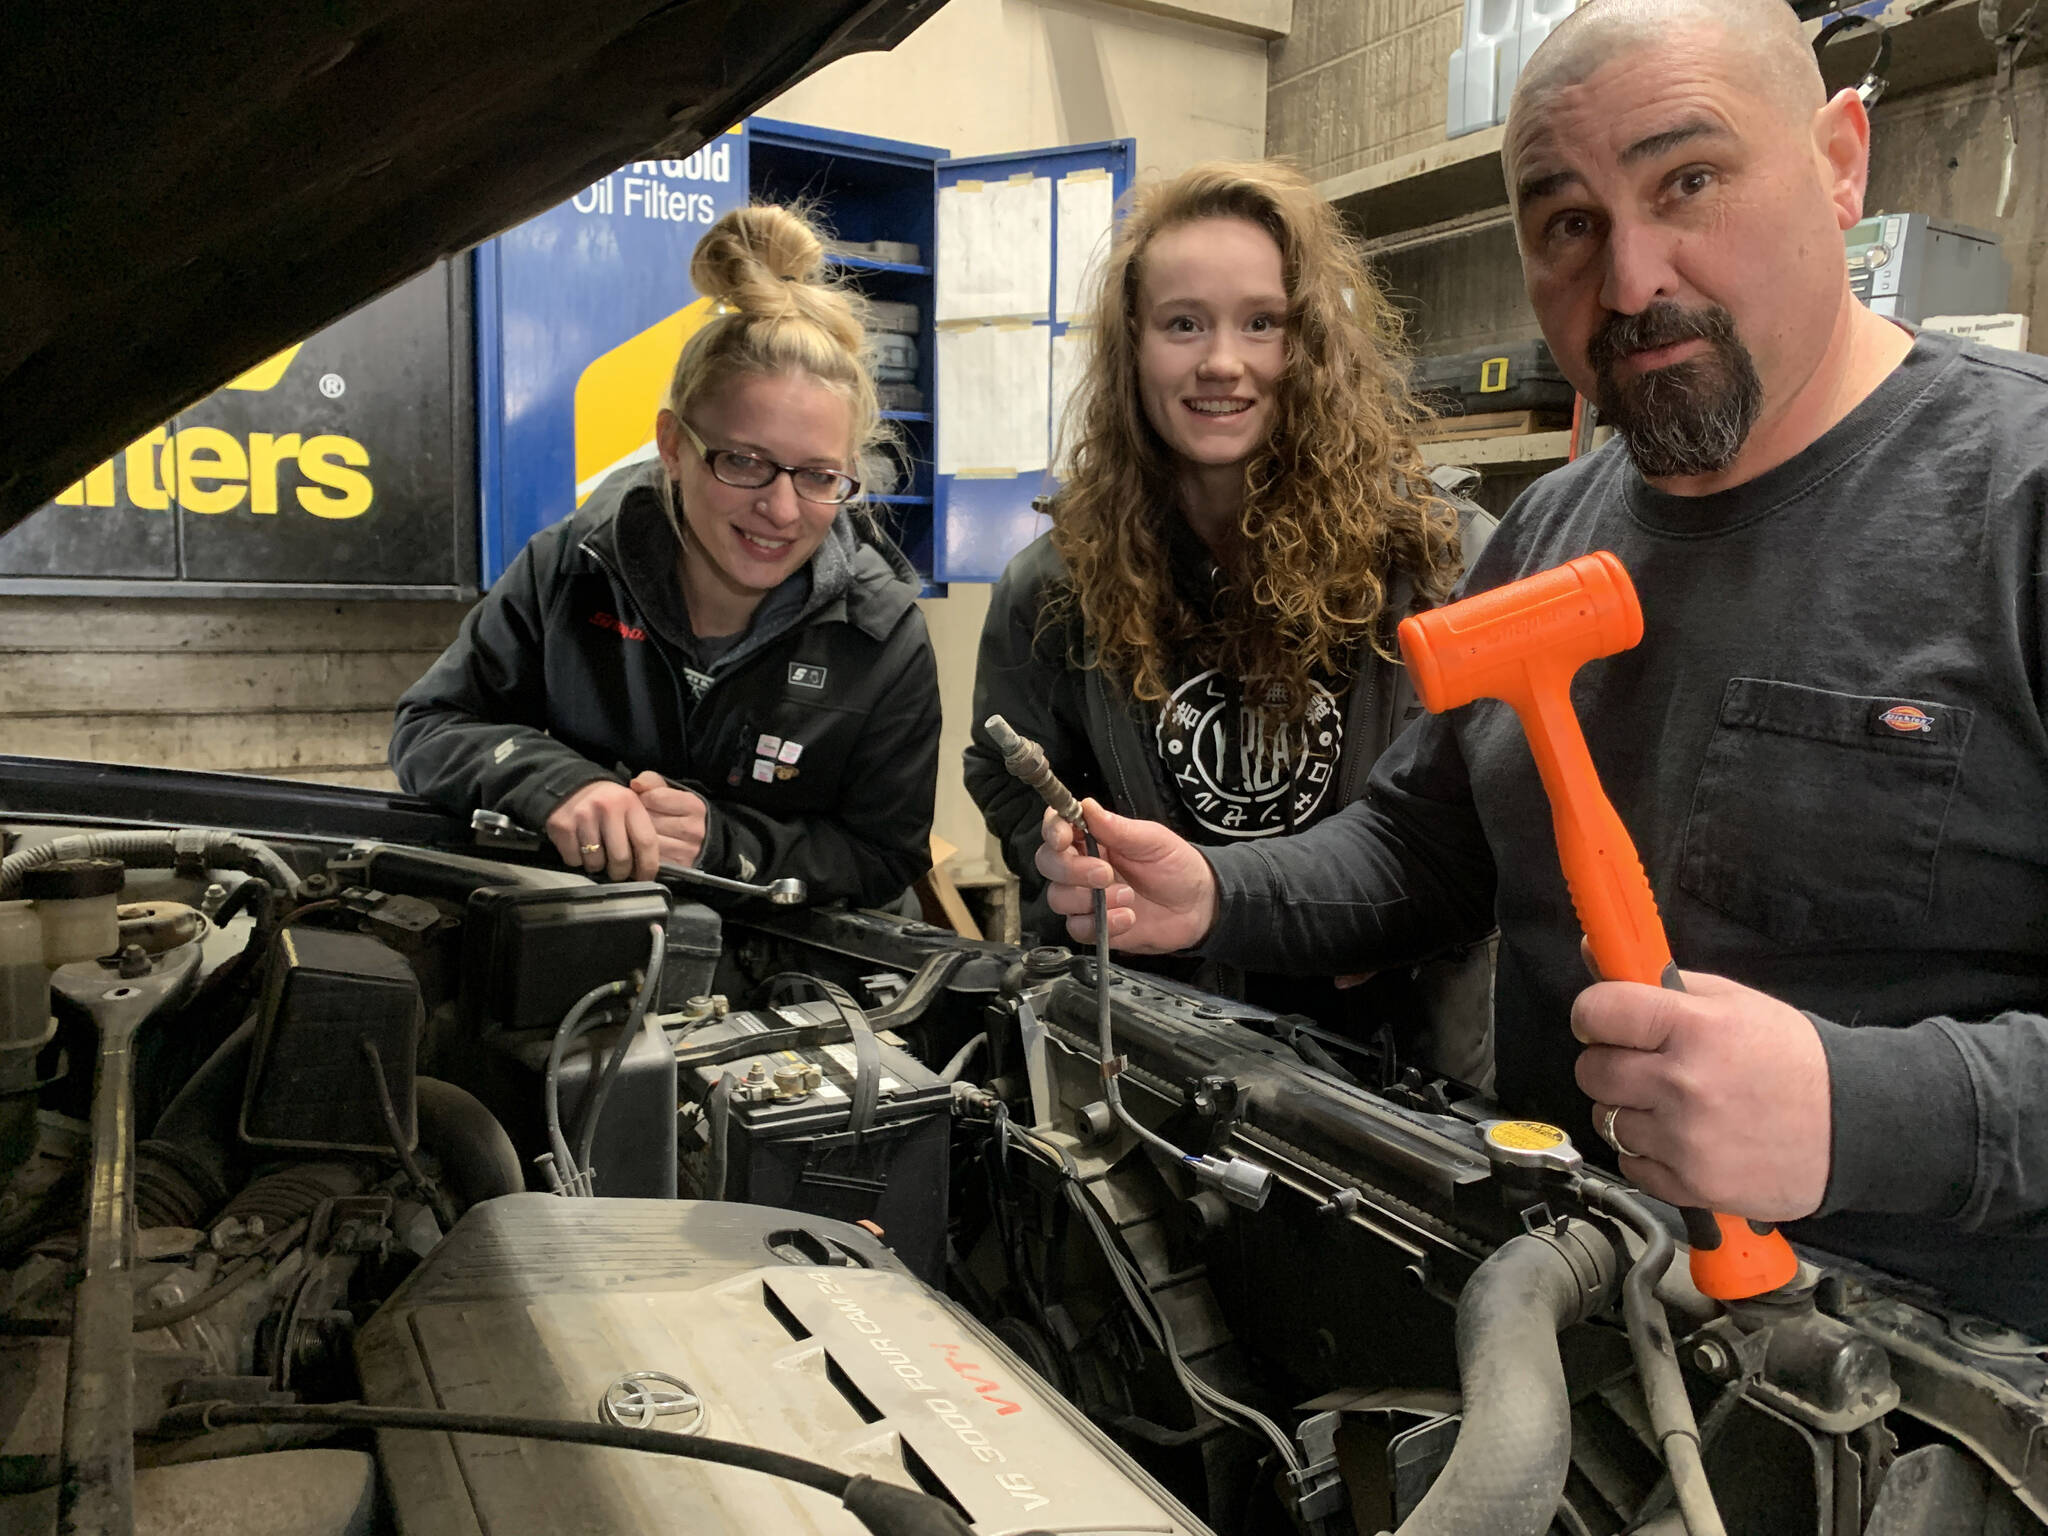 Melissa Sheldon, Tezlyn Kerrone and Robert Tarnoswki, owner of Sunny’s Service, pose in front of a car they were working on, March 2023.